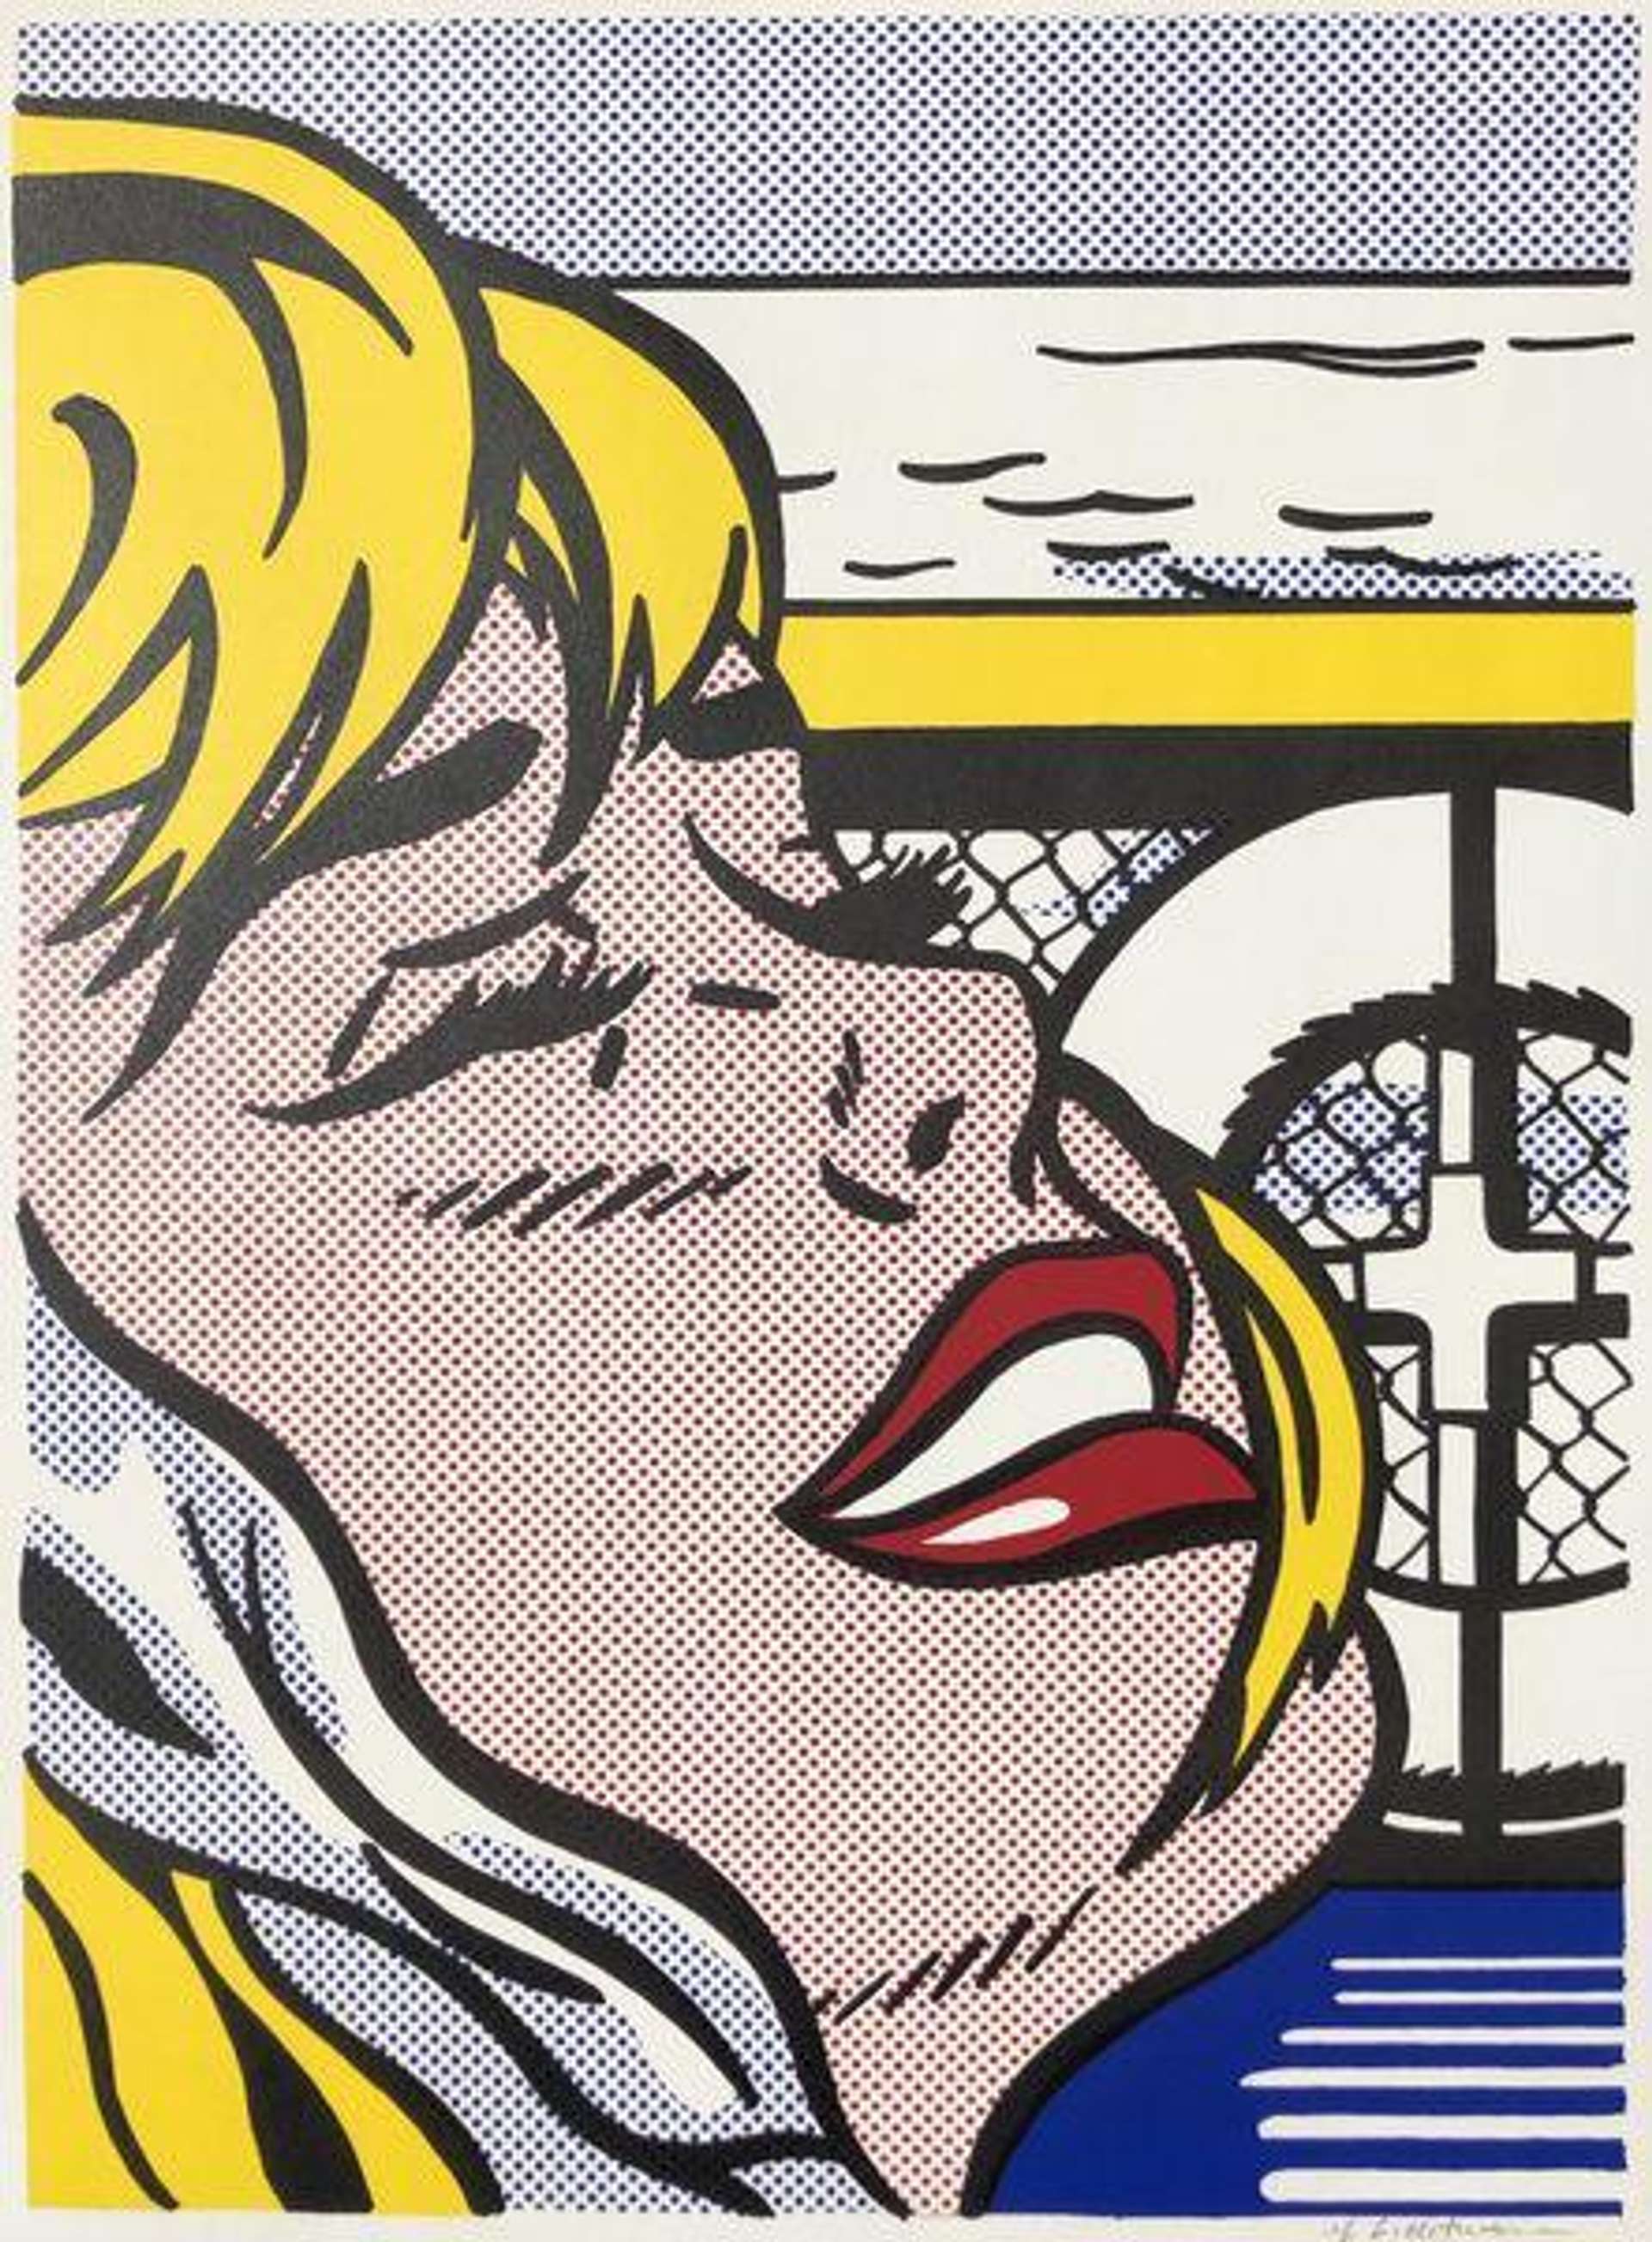 A screenprint by Roy Lichtenstein depicting a comic book heroine across the length of the composition, delineated in graphic Ben Day dots